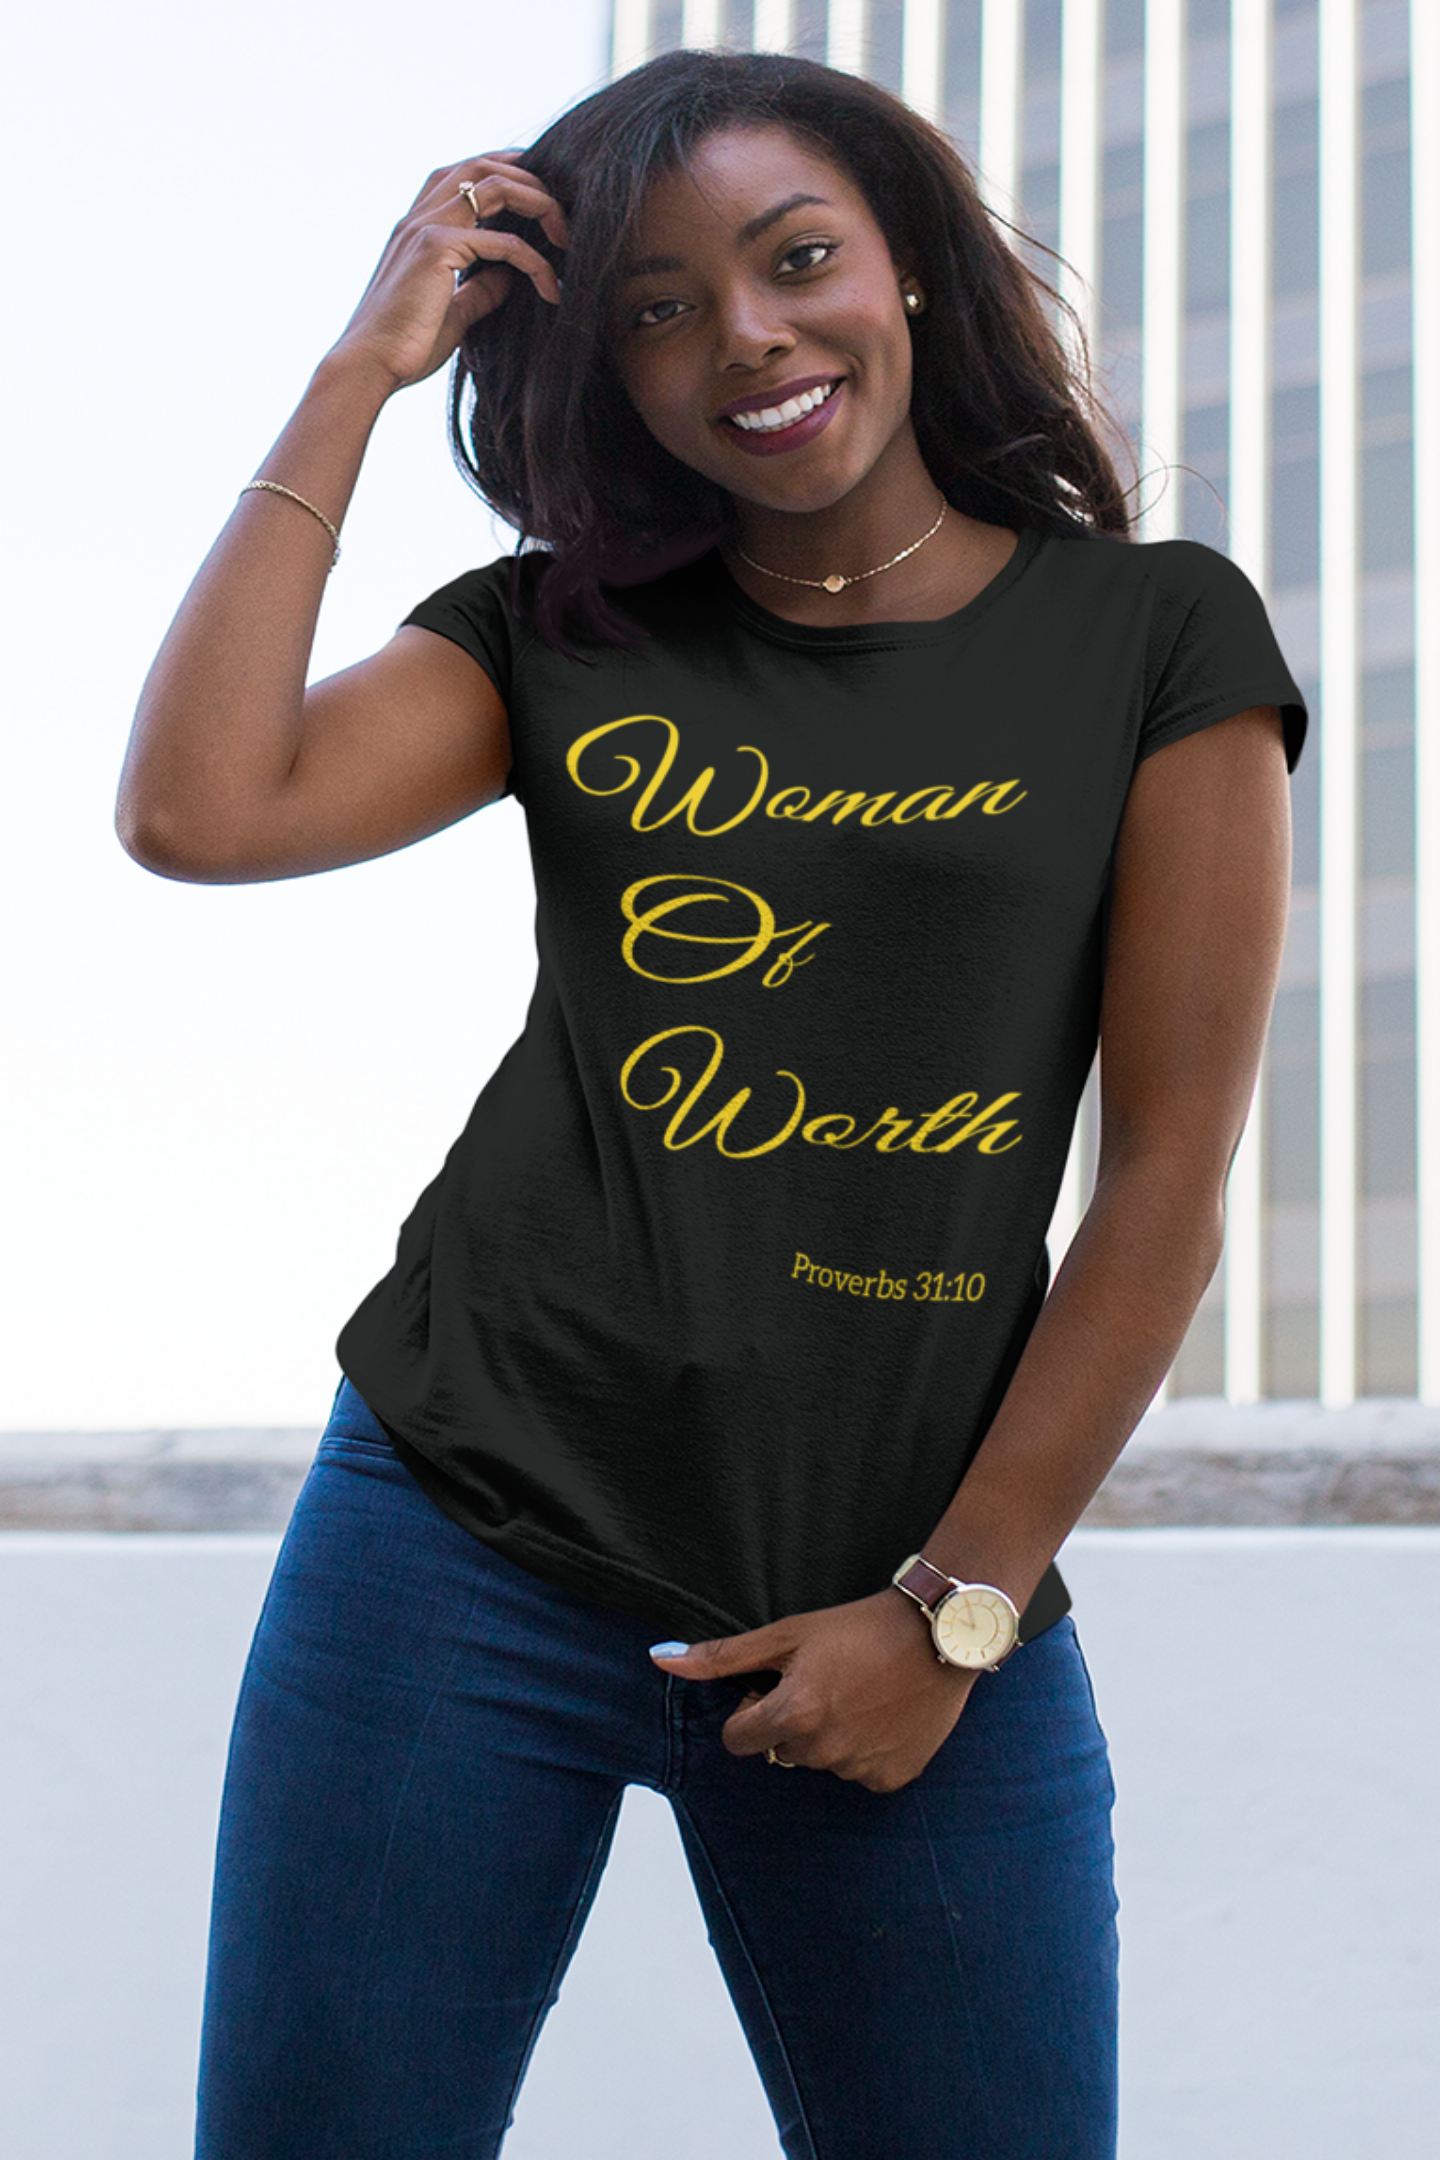 Woman Of Worth - Proverbs 31:10